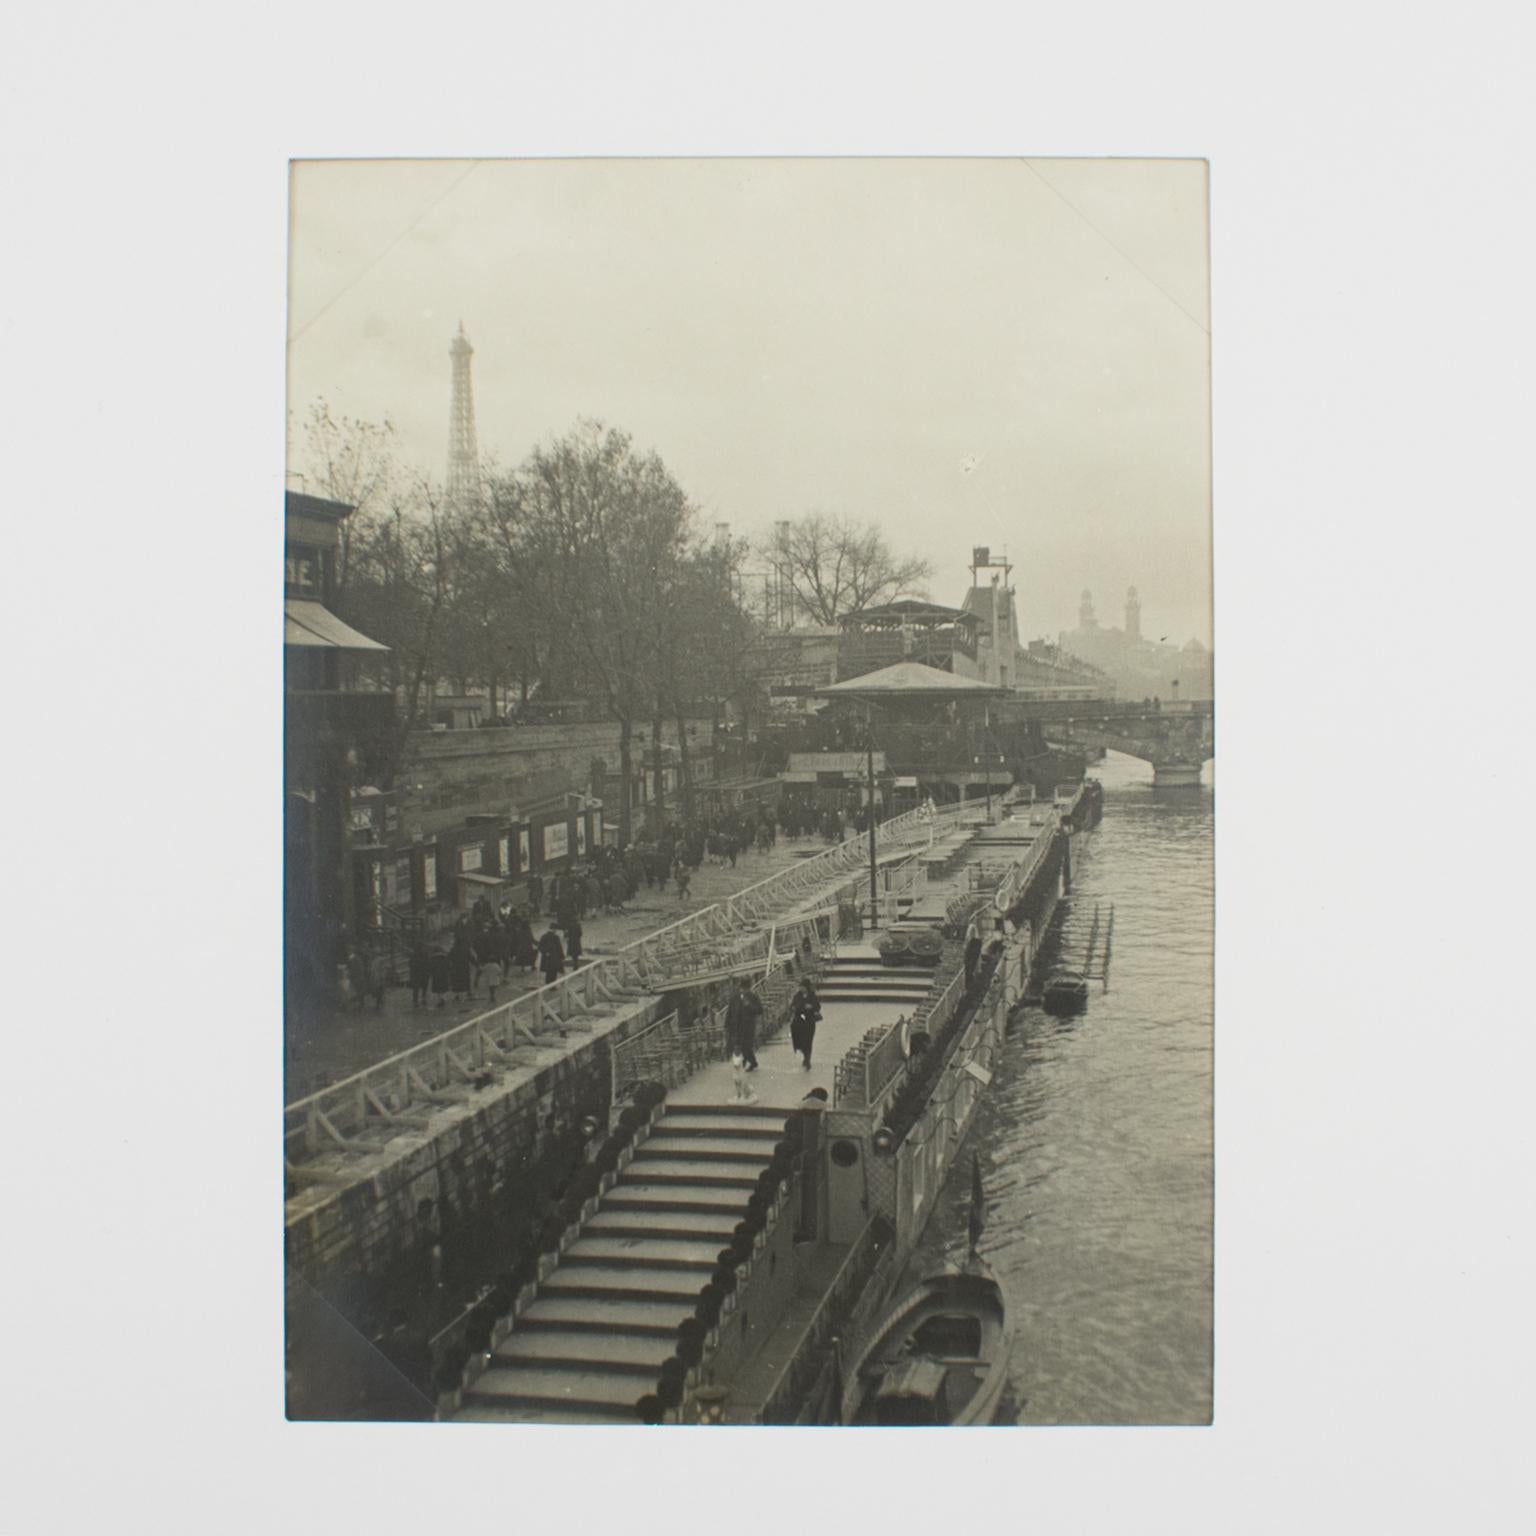 A unique original silver gelatin black and white photography.
The International Decorative Arts Exhibition in Paris, in October 1925. By the river Seine, access to the Department Store Samaritaine pavilion.
Features:
Original silver gelatin print